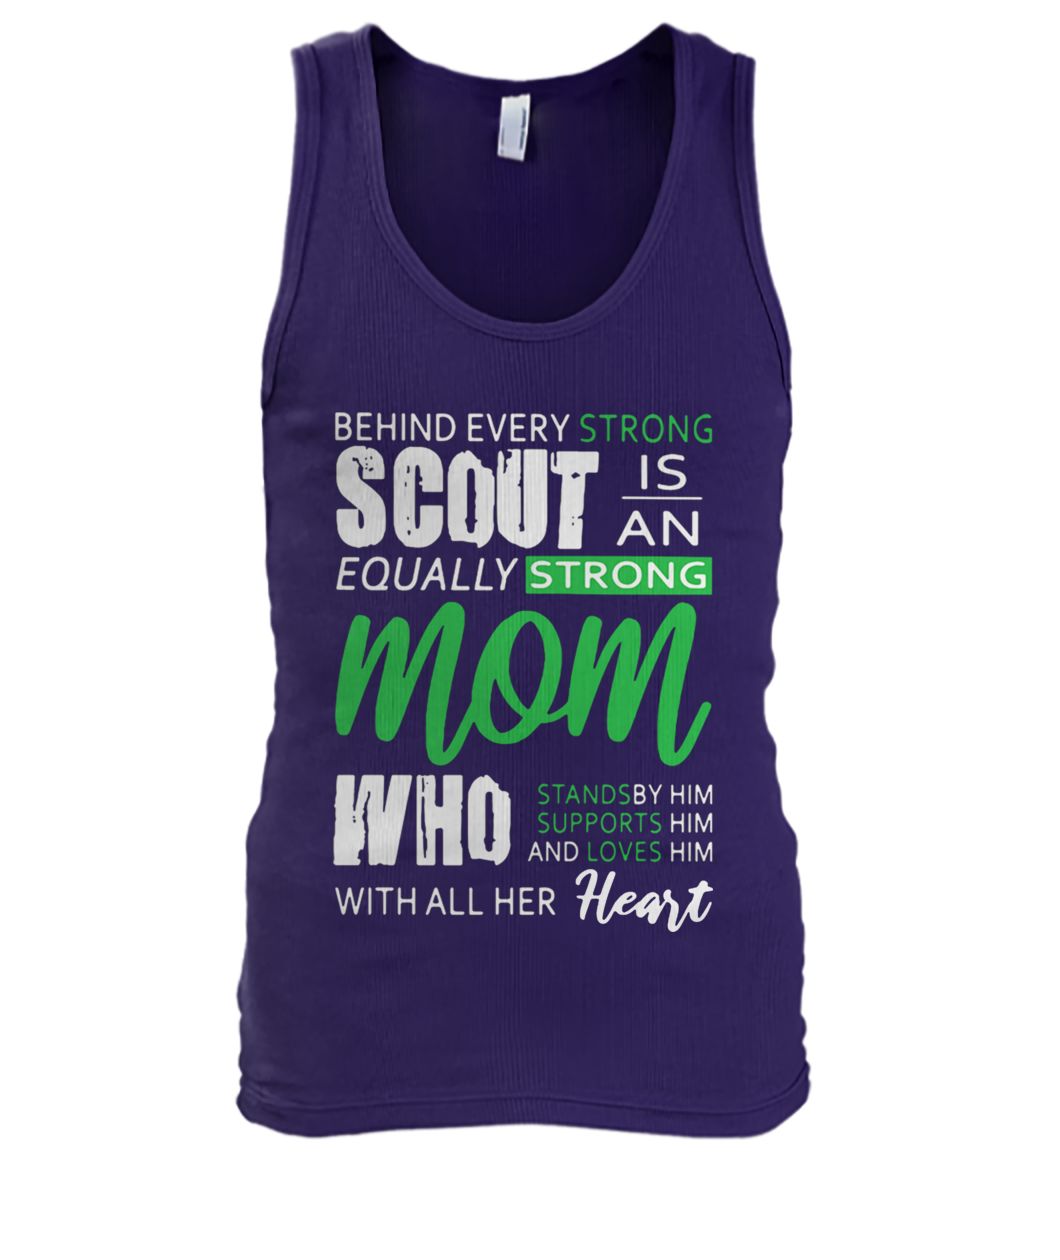 Behind every strong scout is an equally strong mom men's tank top